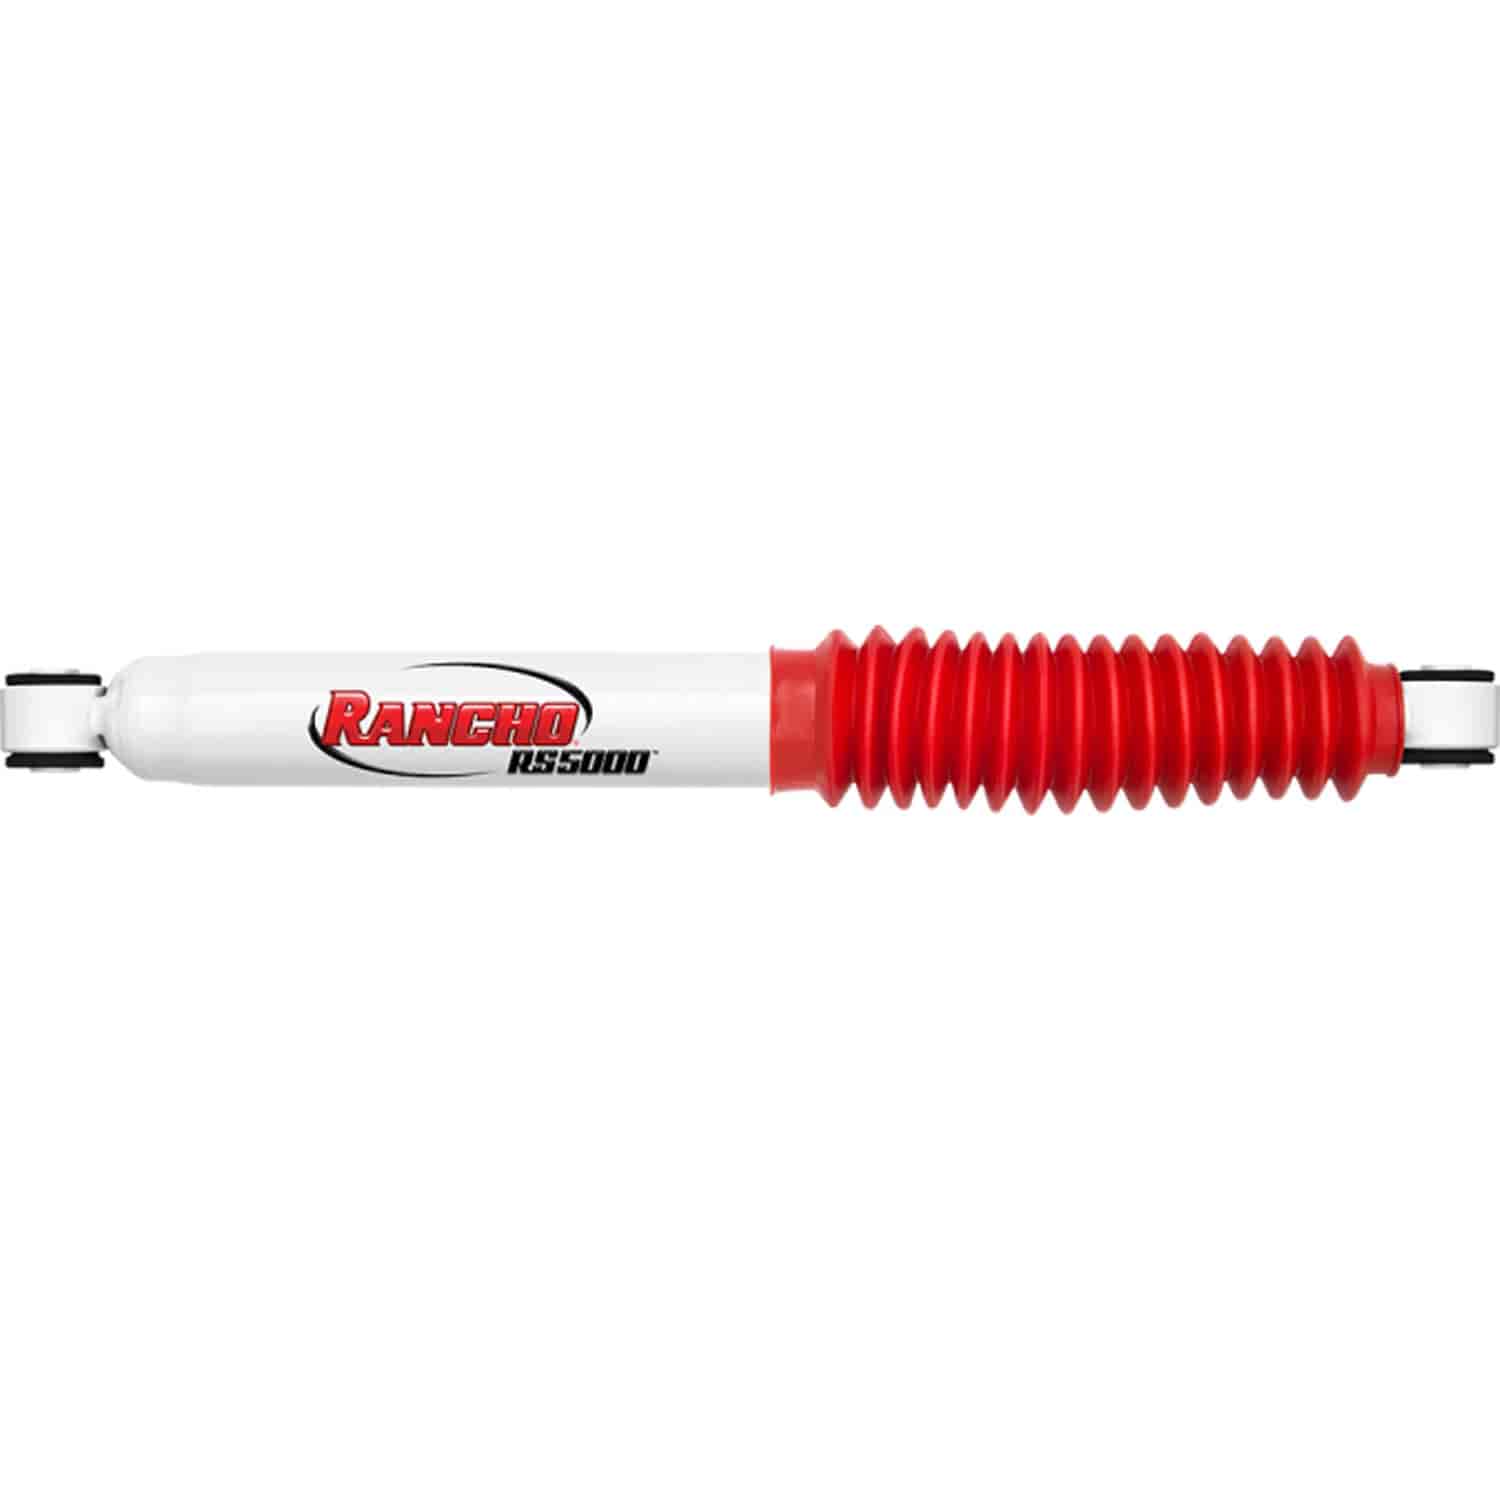 RS5000 Rear Shock Absorber Fits GM 2500HD and 3500HD Pickups